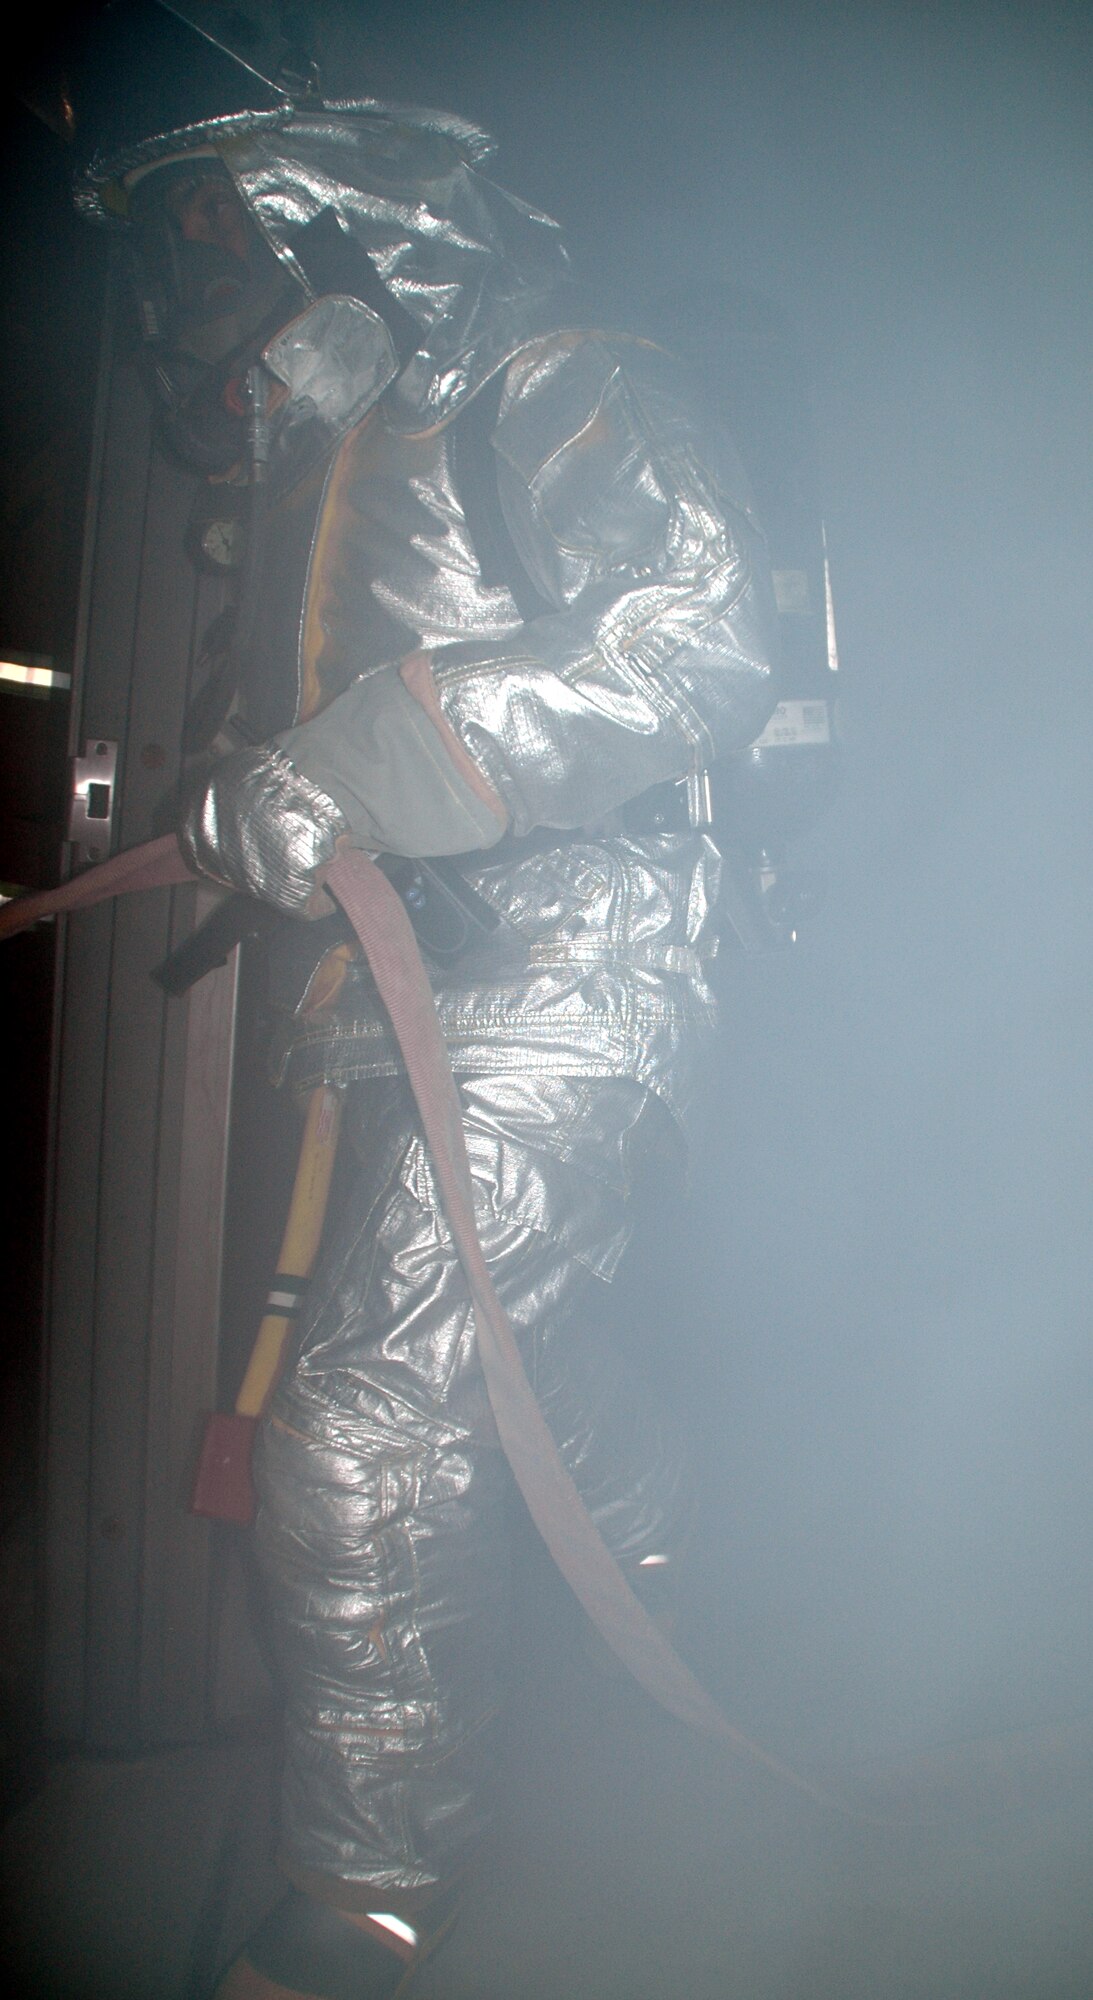 WRIGHT-PATTERSON AFB, Ohio -- Firefighter SrA Glen Beddies Jr., from the 445th Civil Engineer Squadron’s Fire Fighting Flight enters a dense smoked building to look for victims of smoke inhalations.  It’s estimated that 50-80 per cent of fire deaths are the result of smoke inhalation injuries rather than burns. (U.S. Air Force photo/Tech. Sgt. Charlie Miller).